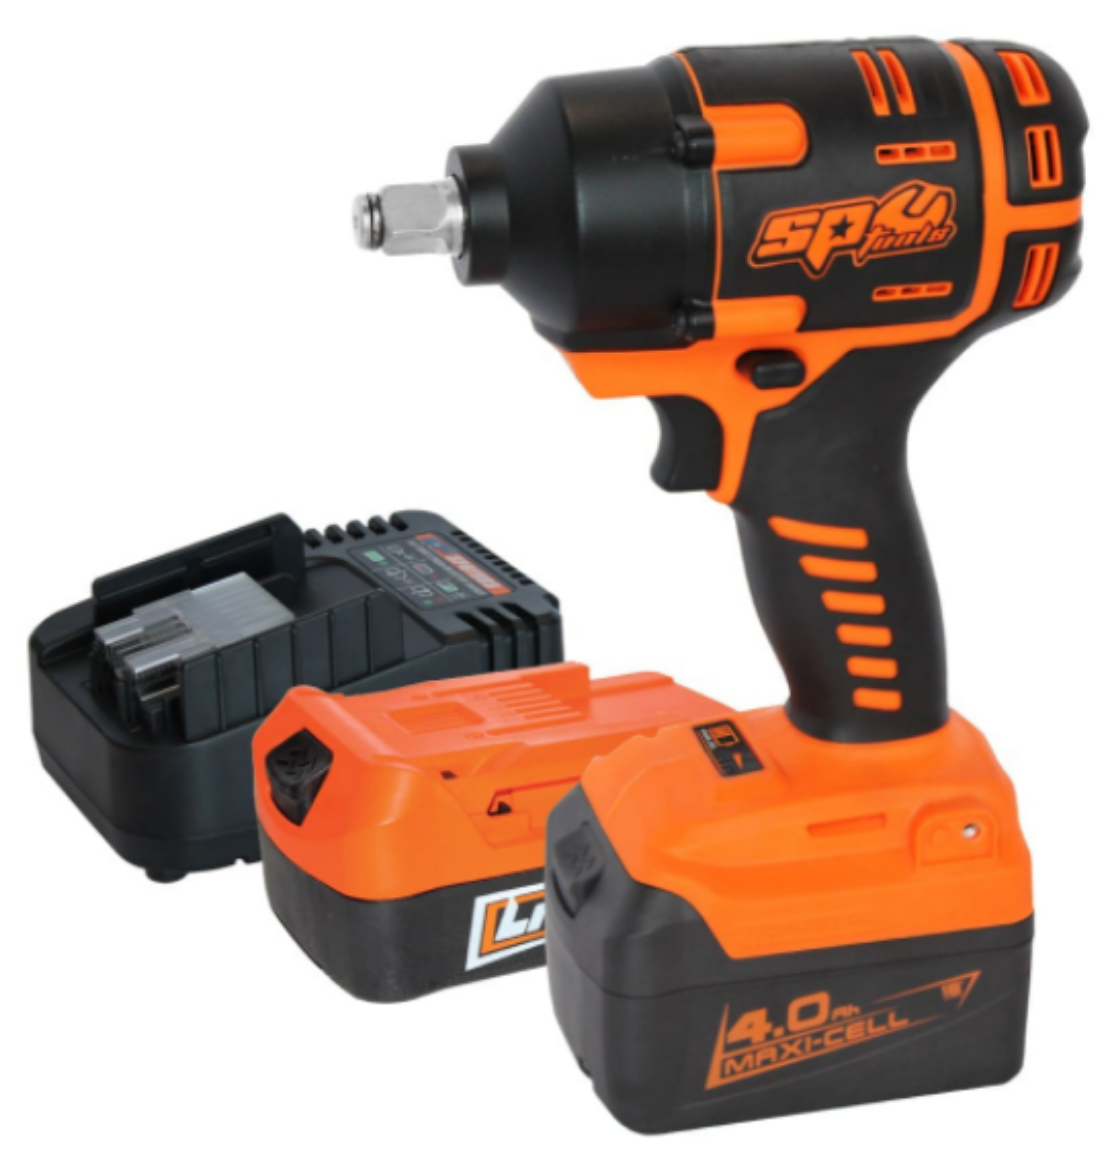 Picture of 18V 1/2" CORDLESS IMPACT WRENCH KIT